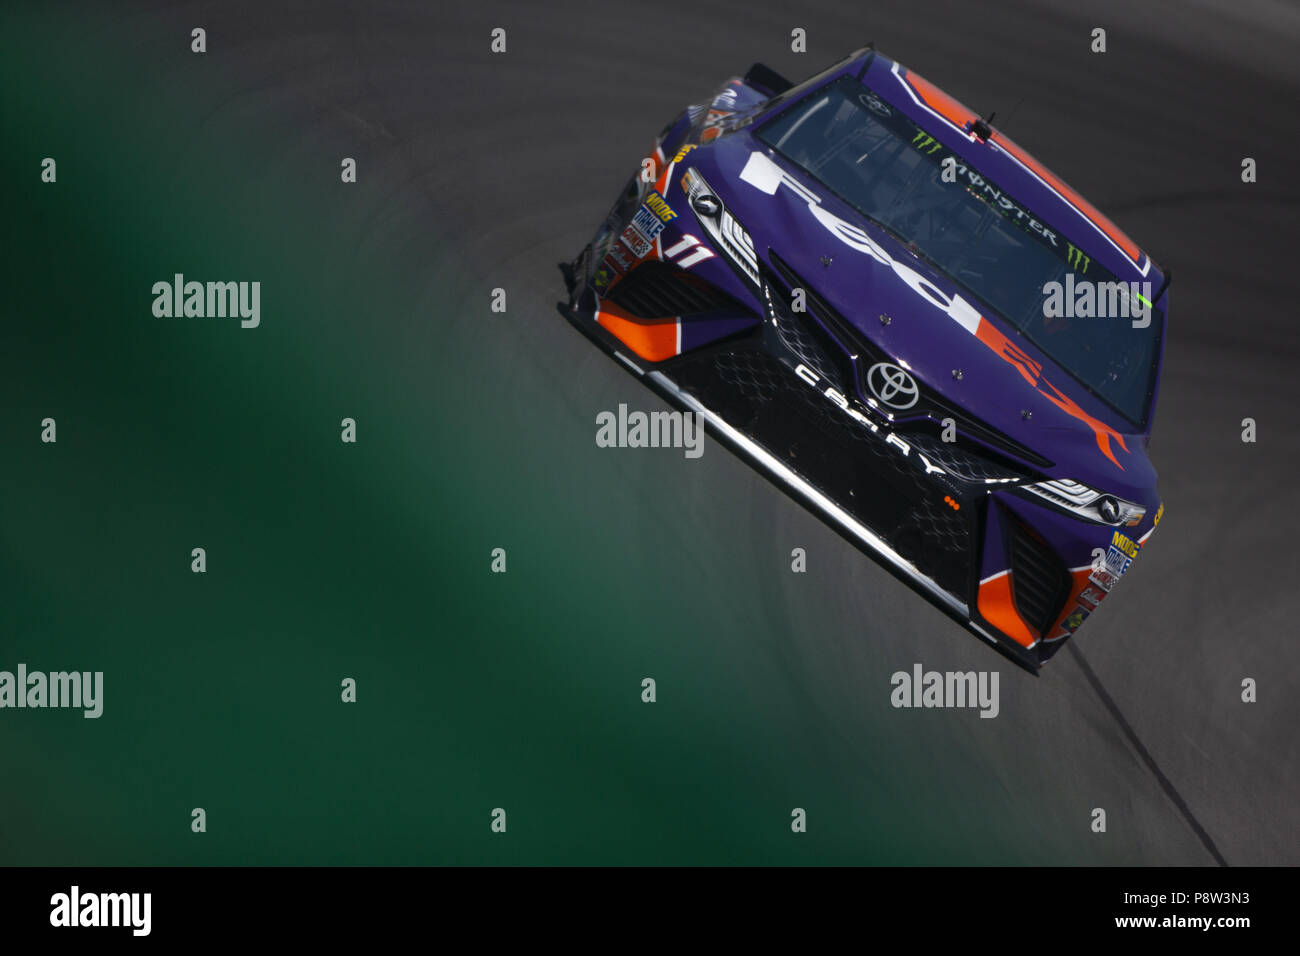 Sparta, Kentucky, USA. 13th July, 2018. Denny Hamlin (11) practices for the Quaker State 400 at Kentucky Speedway in Sparta, Kentucky. Credit: Stephen A. Arce/ASP/ZUMA Wire/Alamy Live News Stock Photo